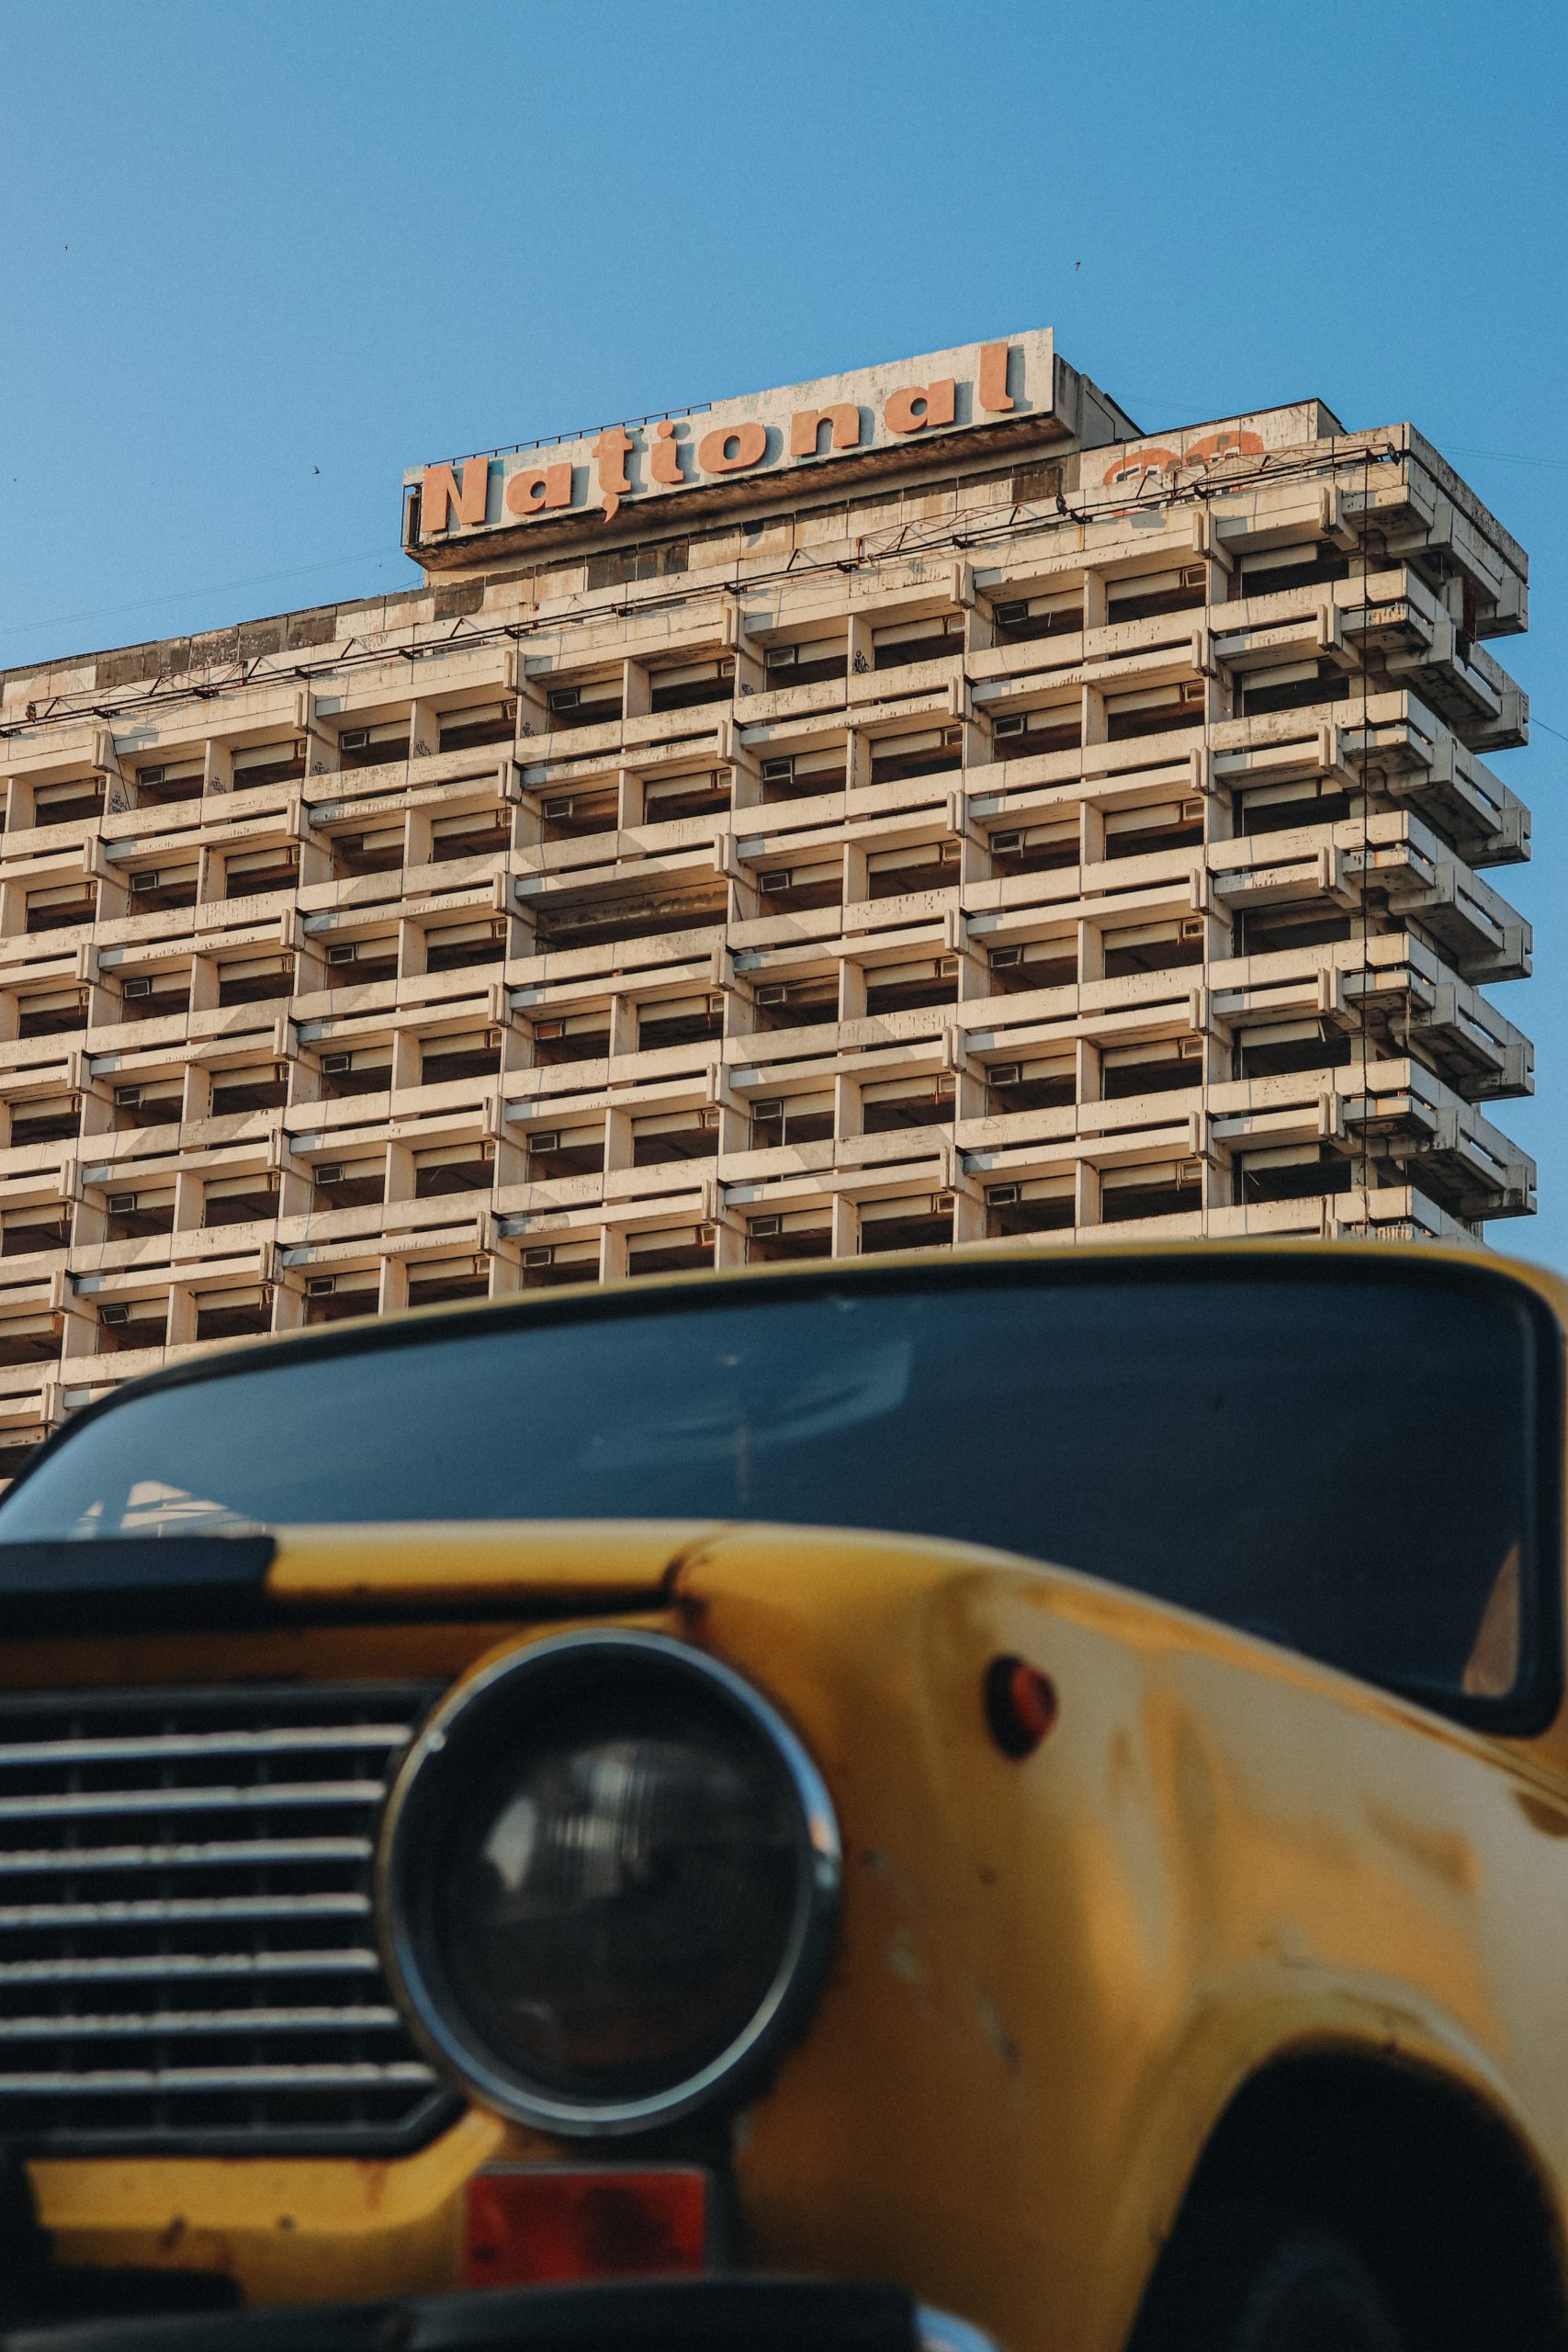 A close-up of a Zhiguli car, manufactured in Russia and the Soviet Union from 1970 to 2012, sold under the Lada brand. In the background, the Hotel National (formerly Intourist), built in 1978